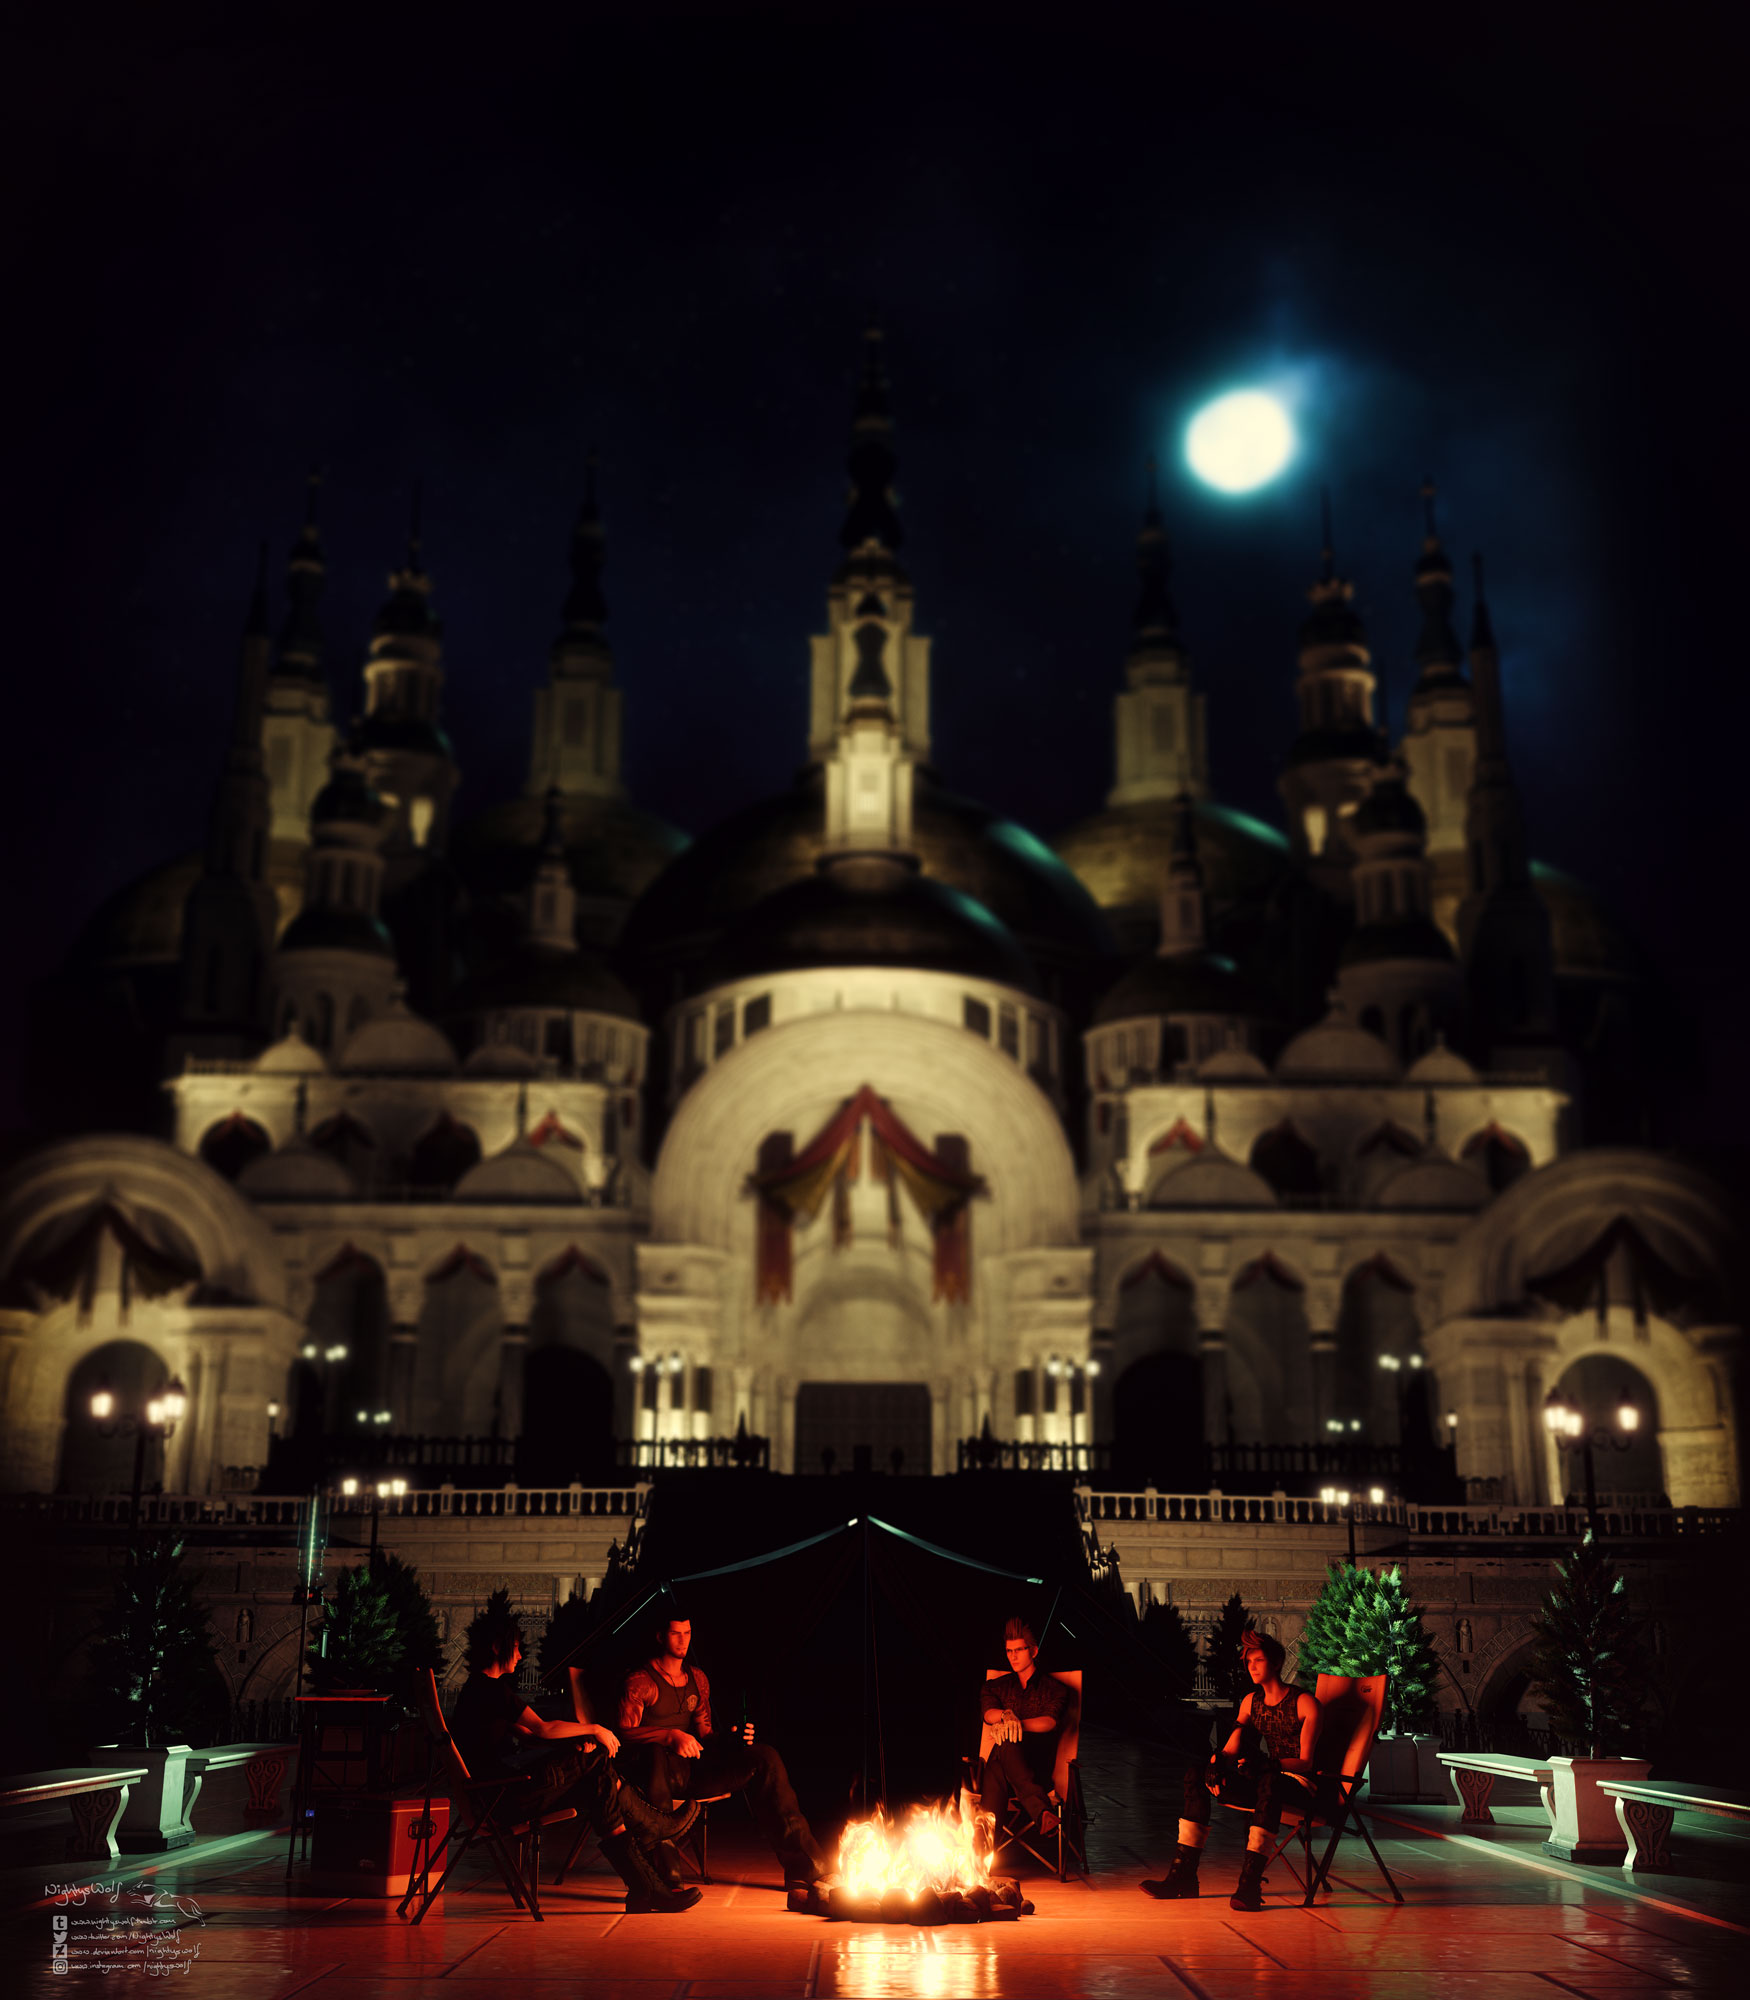 Powerwolf - Let There Be Night by PlaysWithWolves on DeviantArt